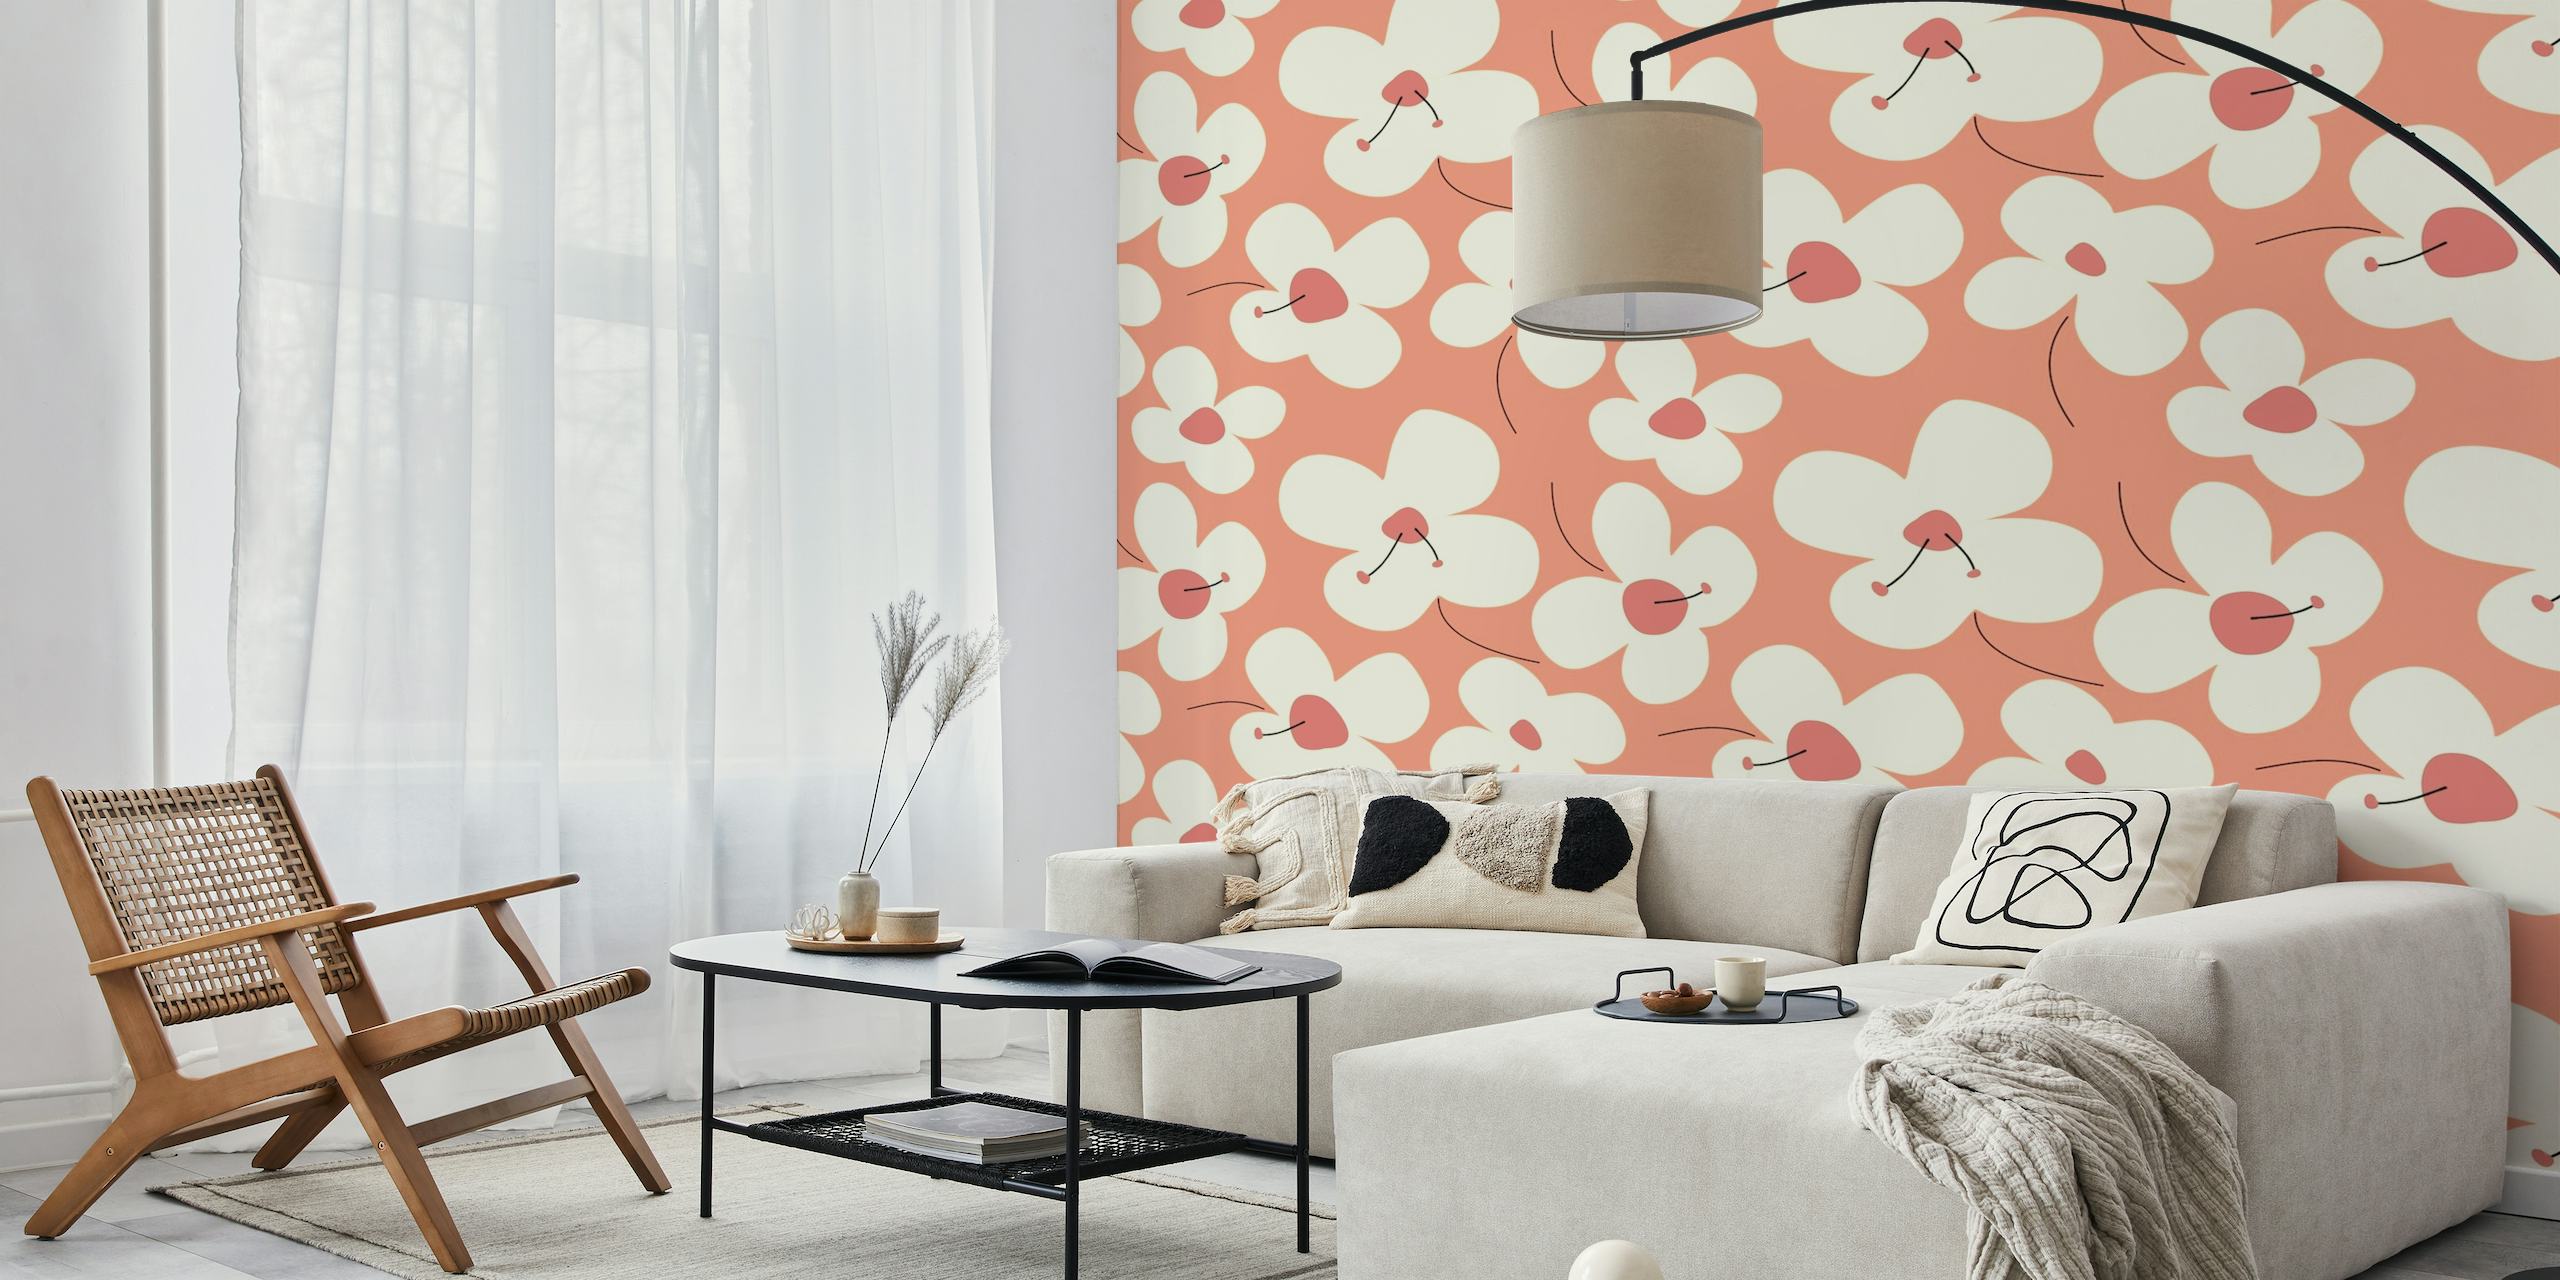 Oversized white flowers on a peach pink background wall mural